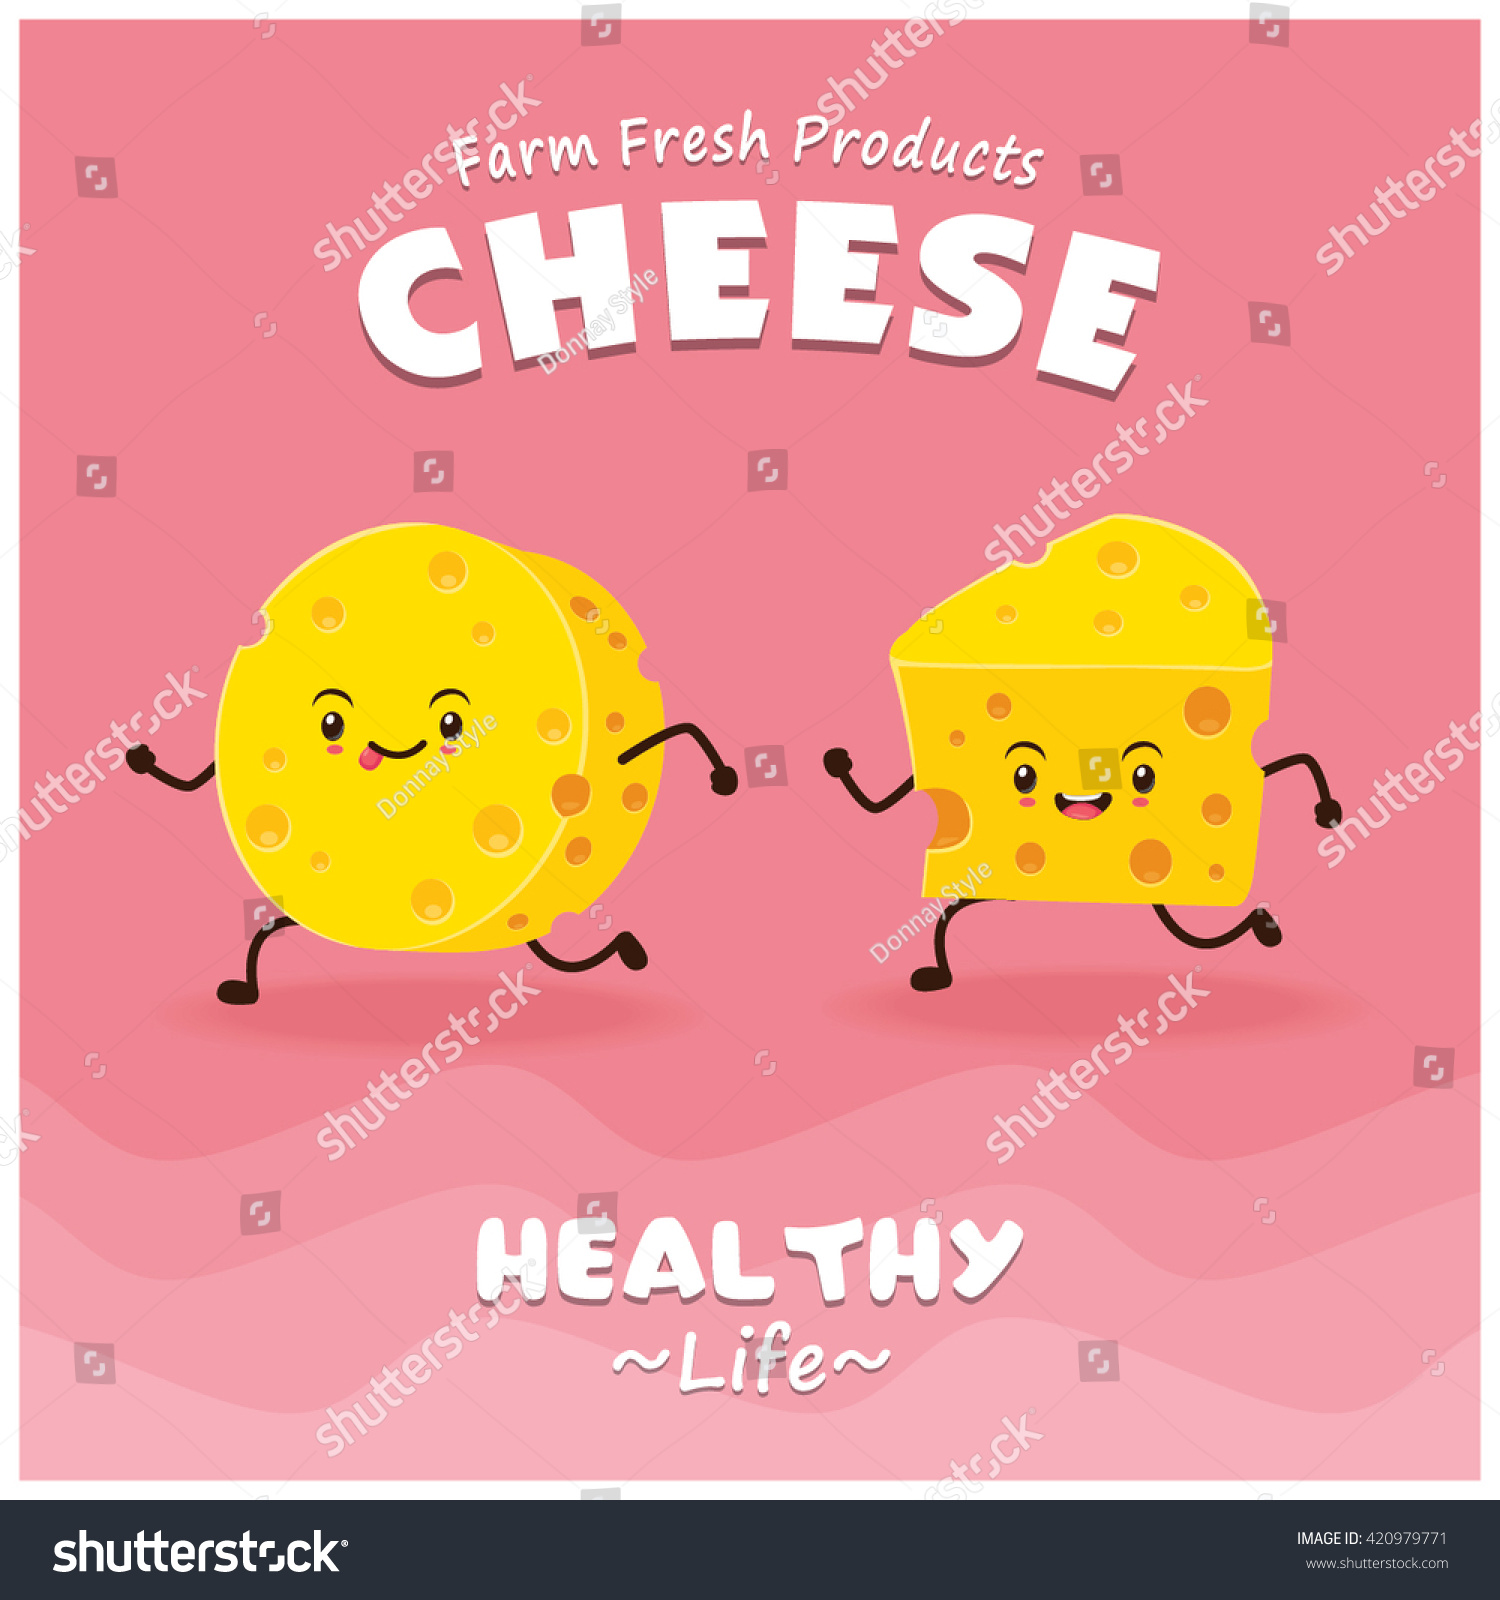 SVG of Vintage Cheese poster design with vector cheese character. svg